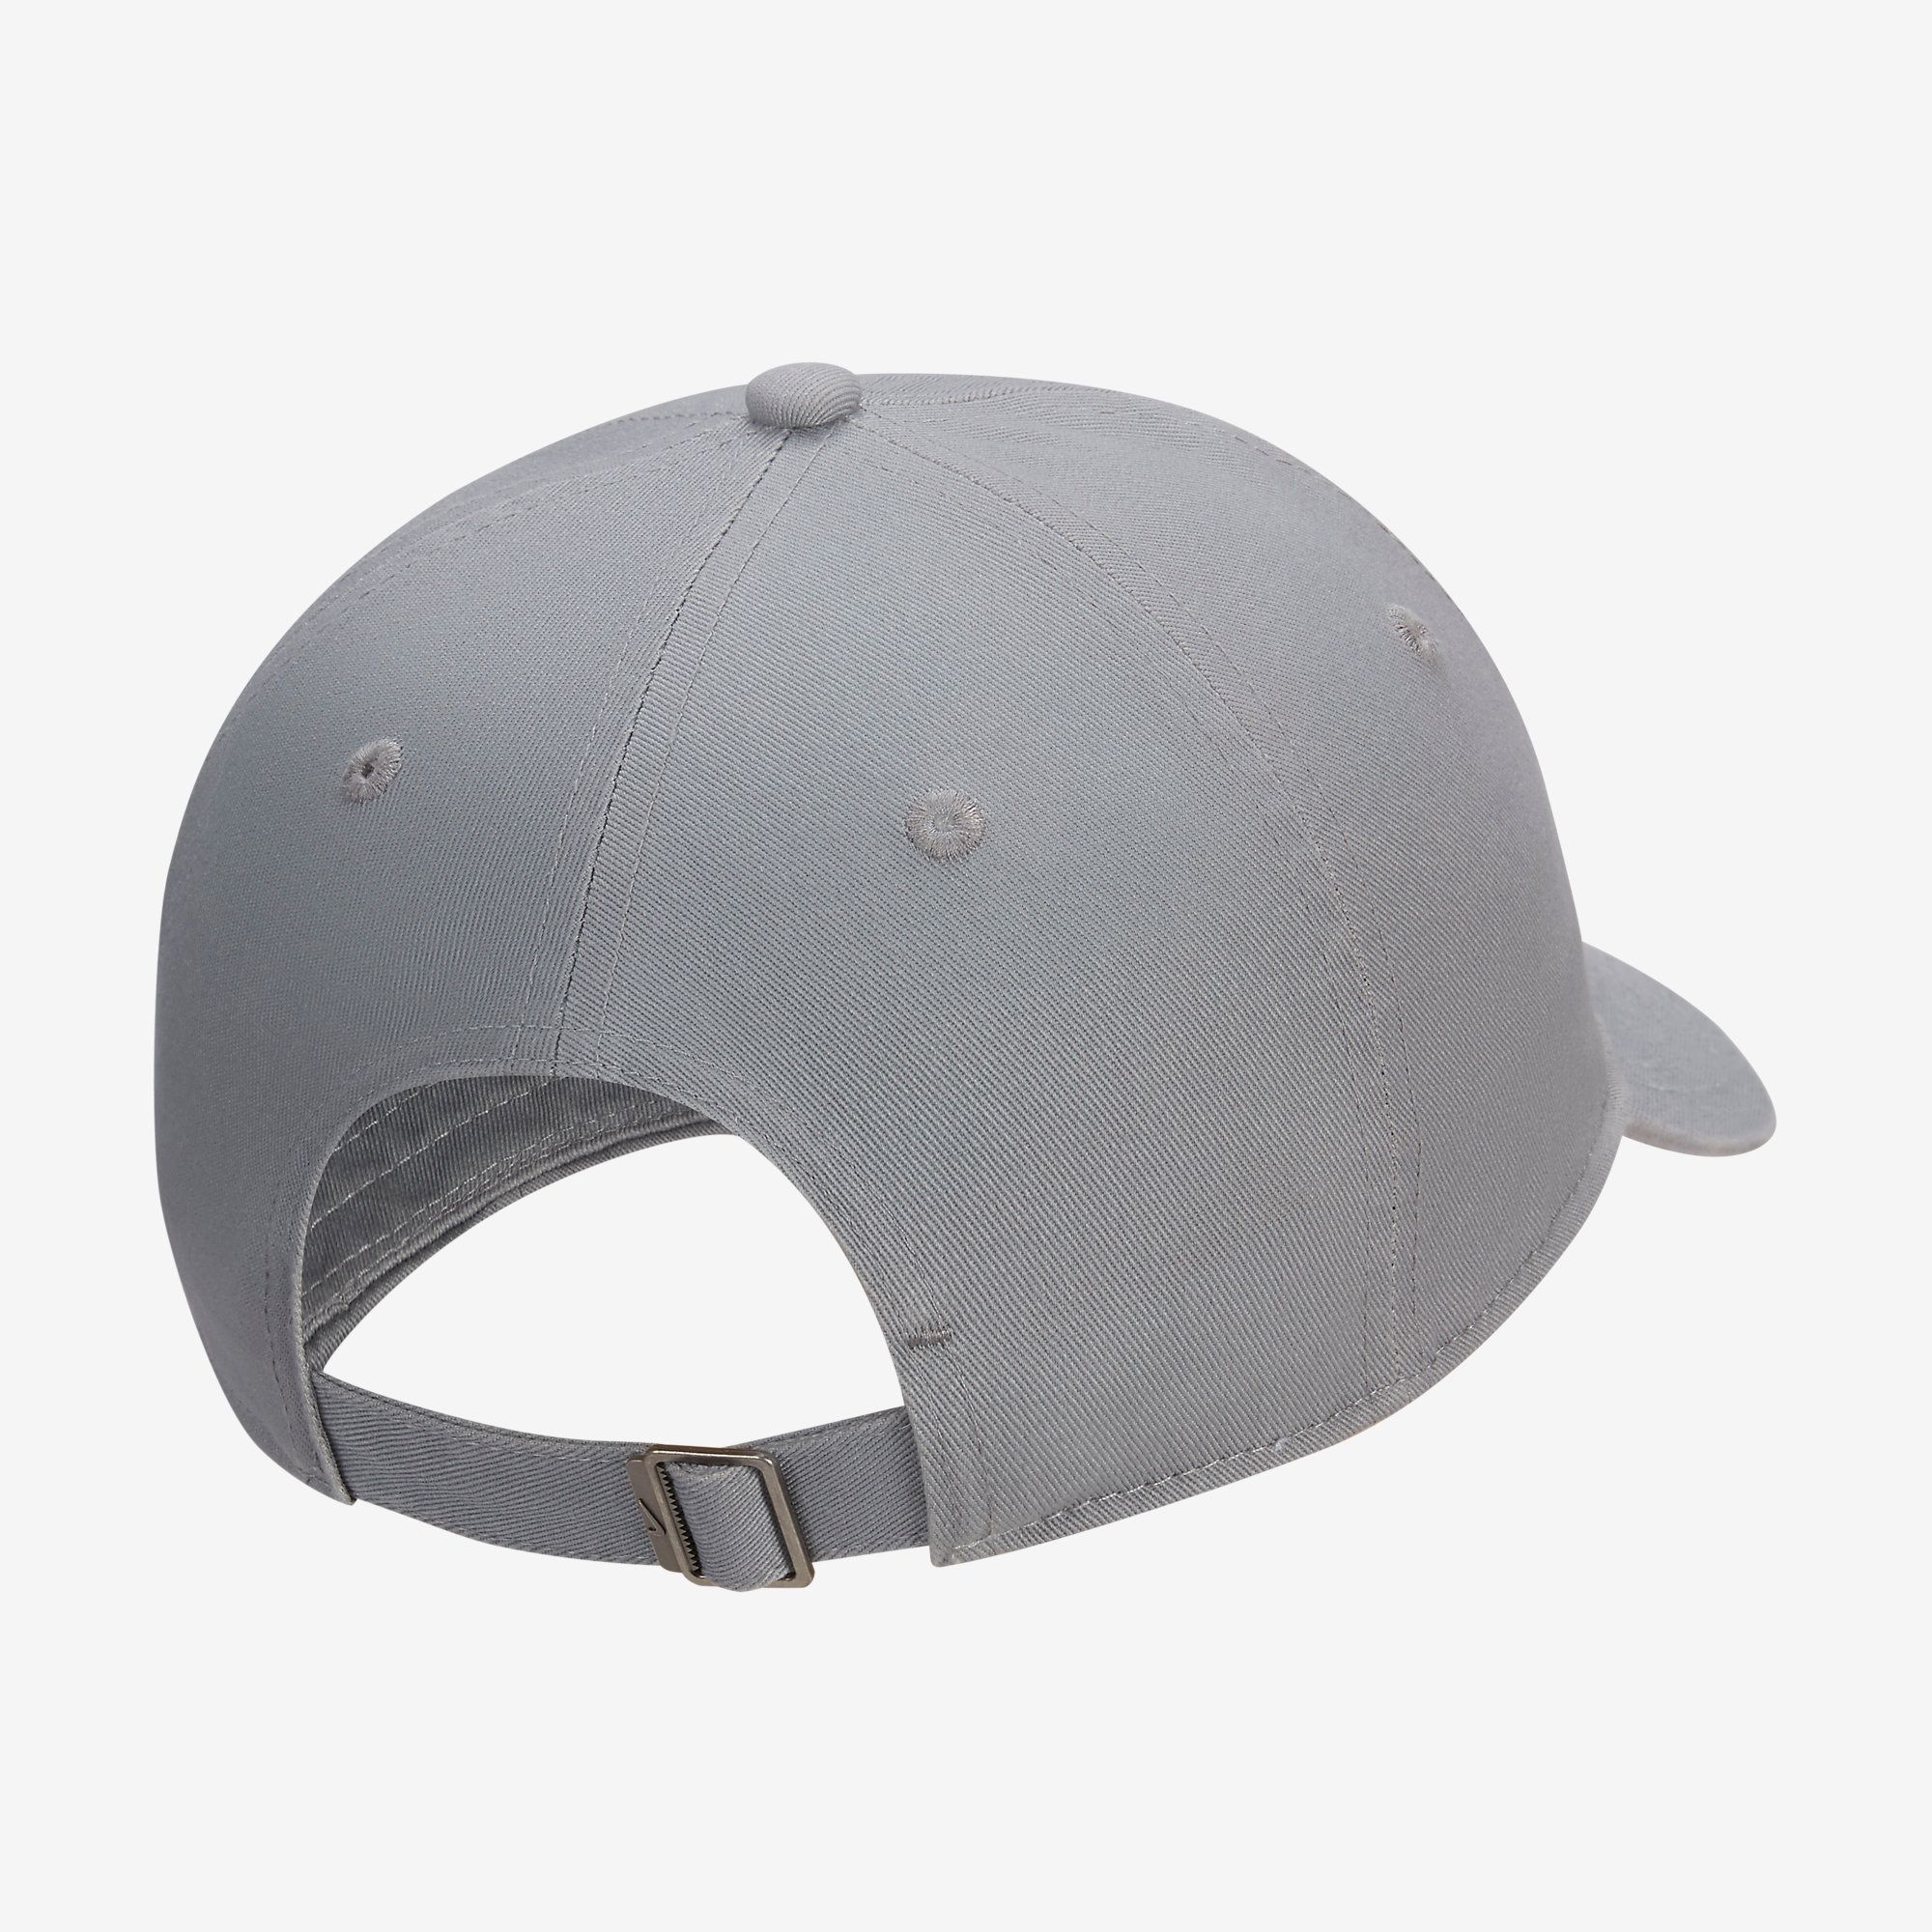  Nike Club Unstructured Futura Wash Cap - Particle Grey 